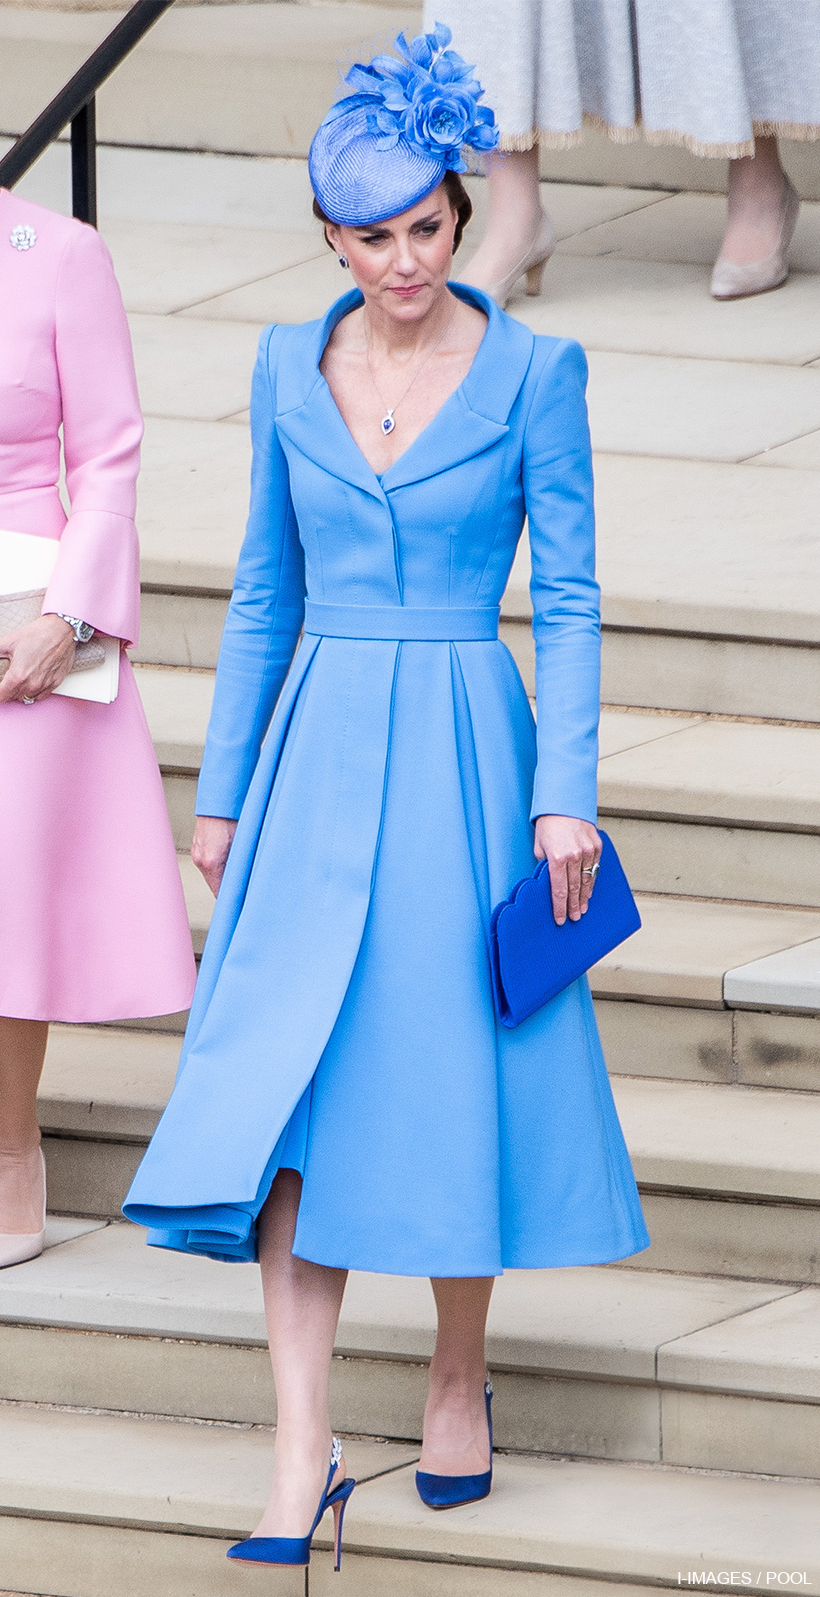 The Princess of Wales at 2022’s Order of the Garter ceremony wearing Aquazzura pumps.  We’re counting the brand as her seventh favourite.